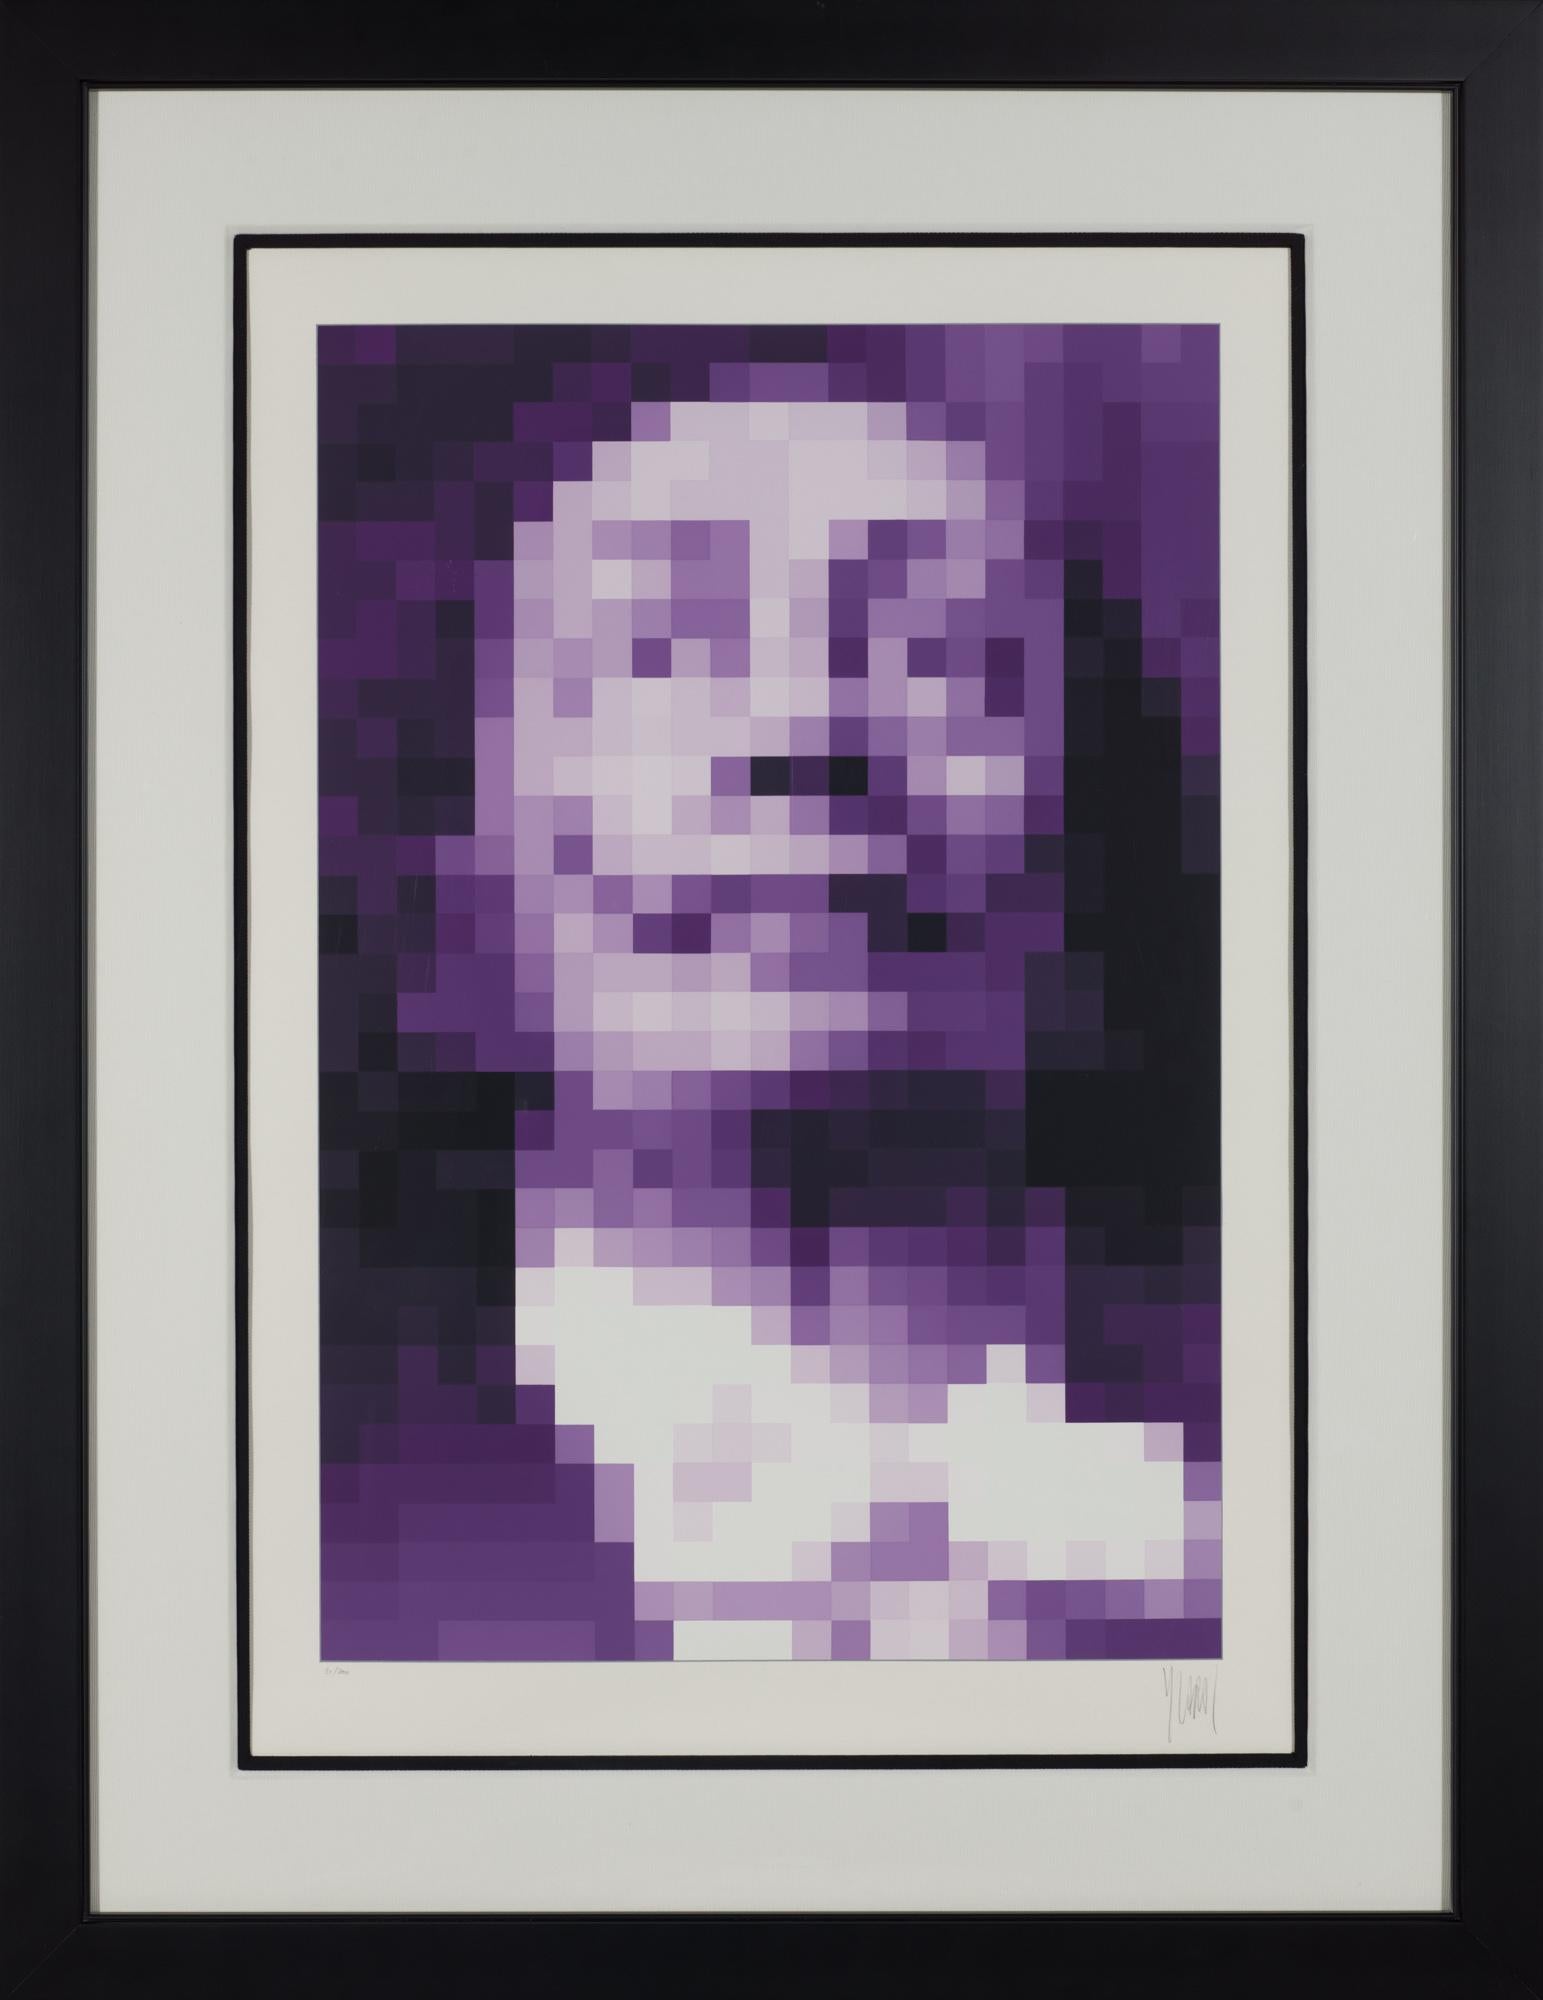 Faces of Dali #1 - Print by Yvaral (Jean-Pierre Vasarely)